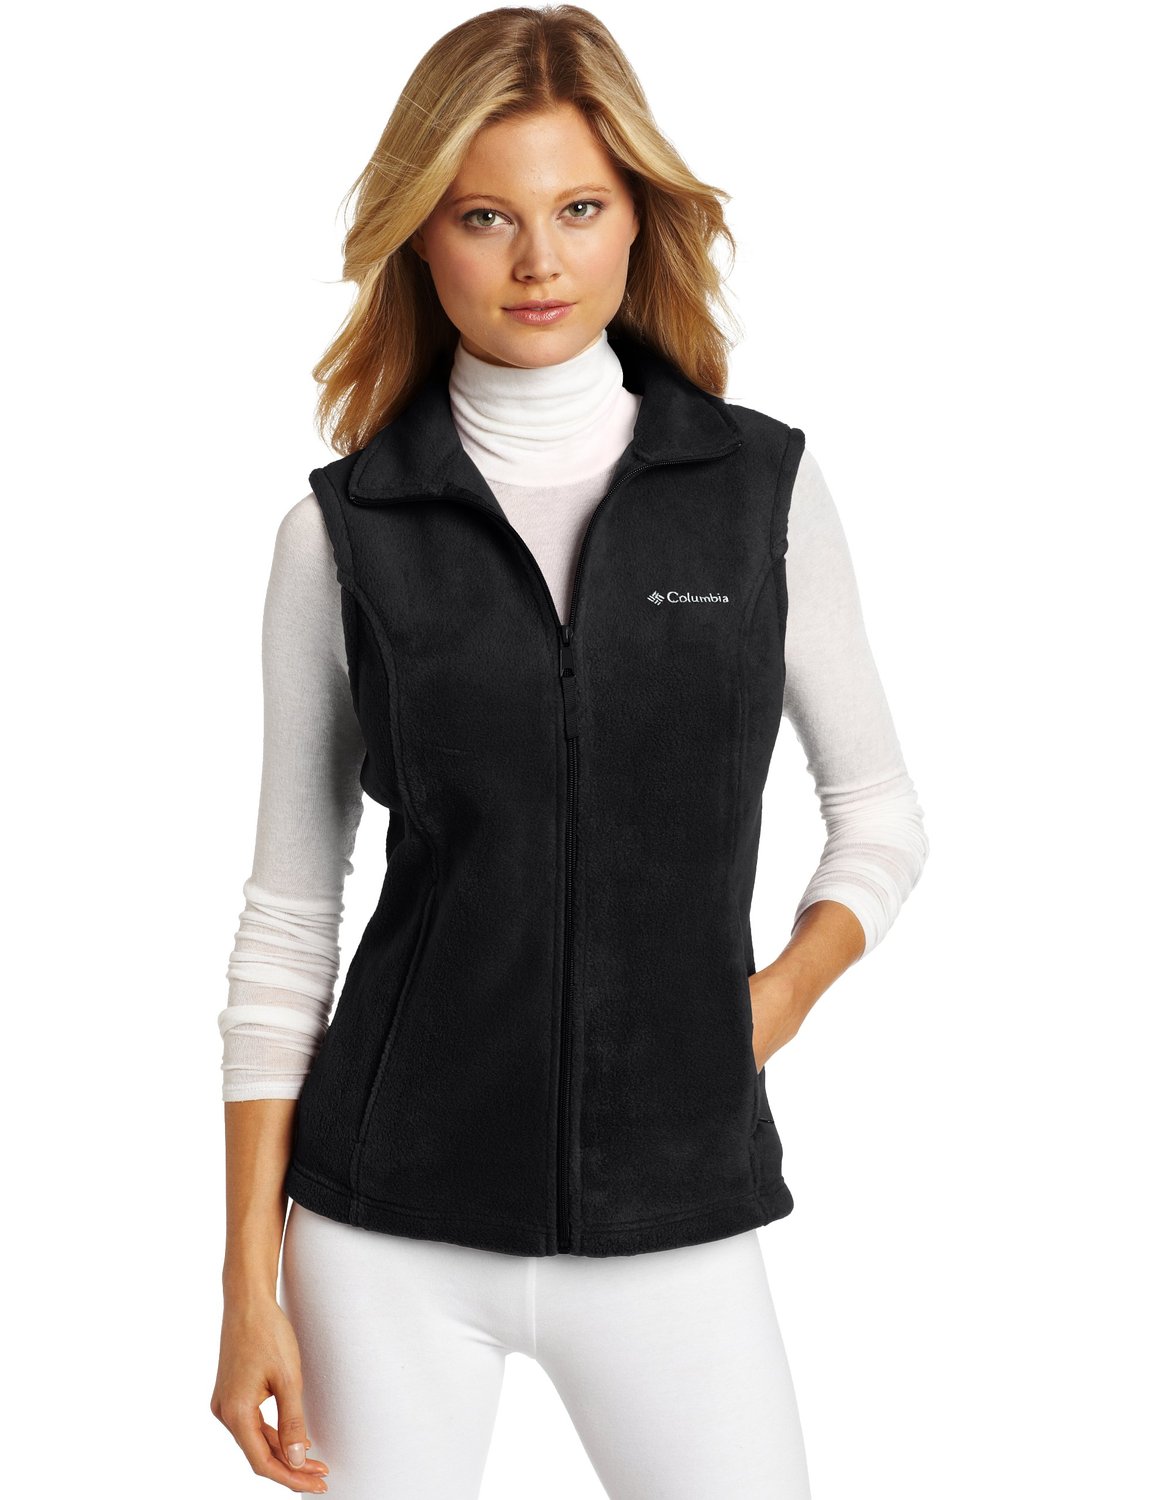 A plush layering piece designed to keep your core warm, this toasty fleece vest is as durable as it is soft